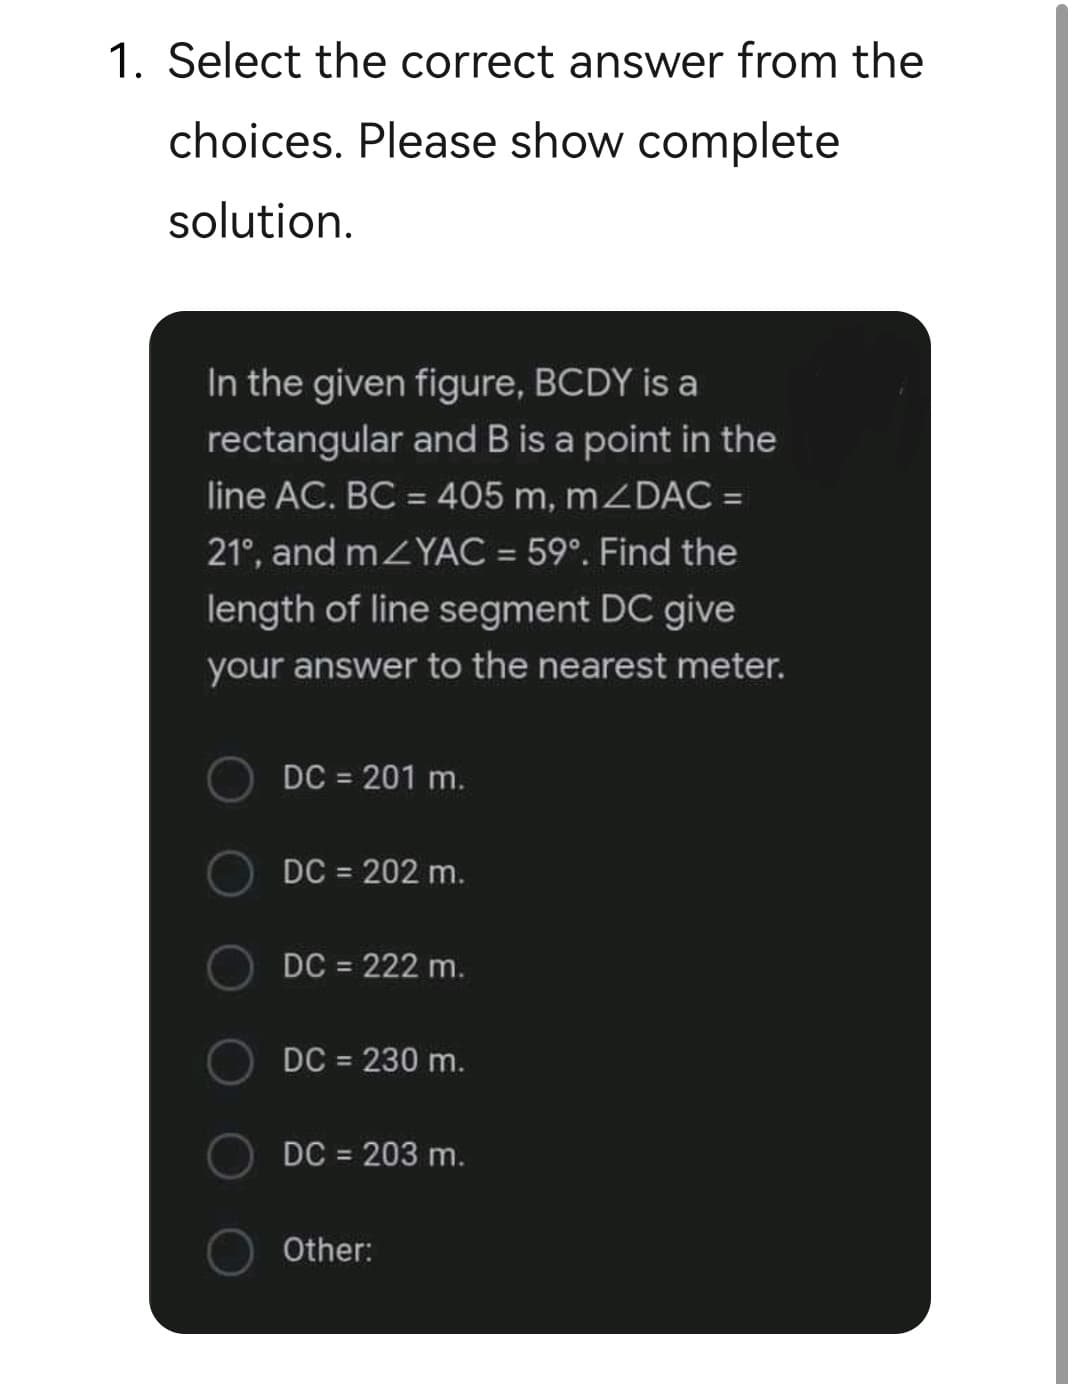 1. Select the correct answer from the
choices. Please show complete
solution.
In the given figure, BCDY is a
rectangular and B is a point in the
line AC. BC = 405 m, mZDAC =
%3D
21°, and mZYAC = 59°. Find the
length of line segment DC give
your answer to the nearest meter.
DC = 201 m.
DC = 202 m.
DC = 222 m.
DC = 230 m.
DC = 203 m.
Other:
